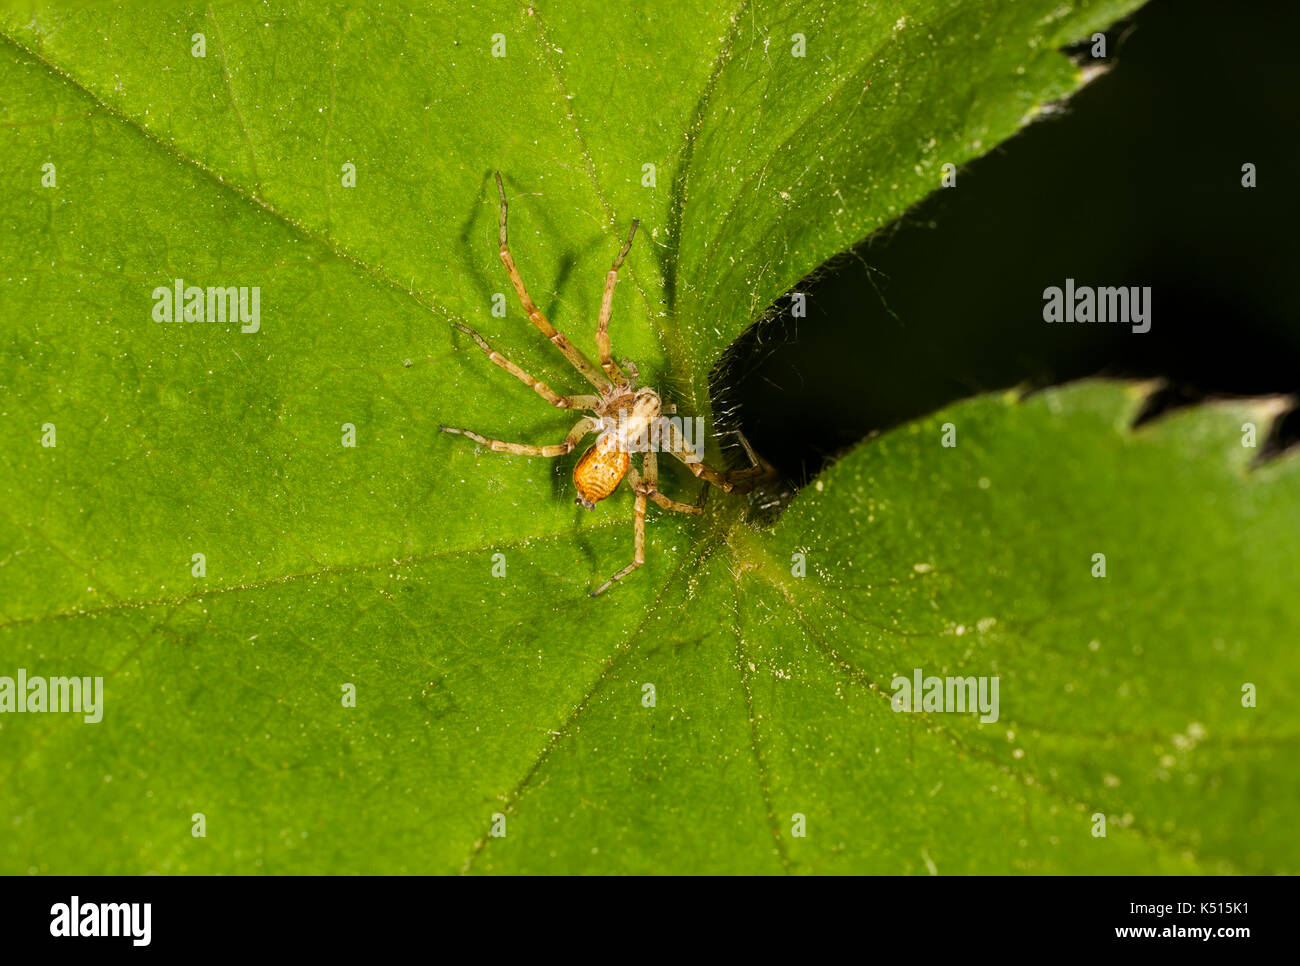 philodromid crab spider on the leaf of Alchemílla in Russia Stock Photo